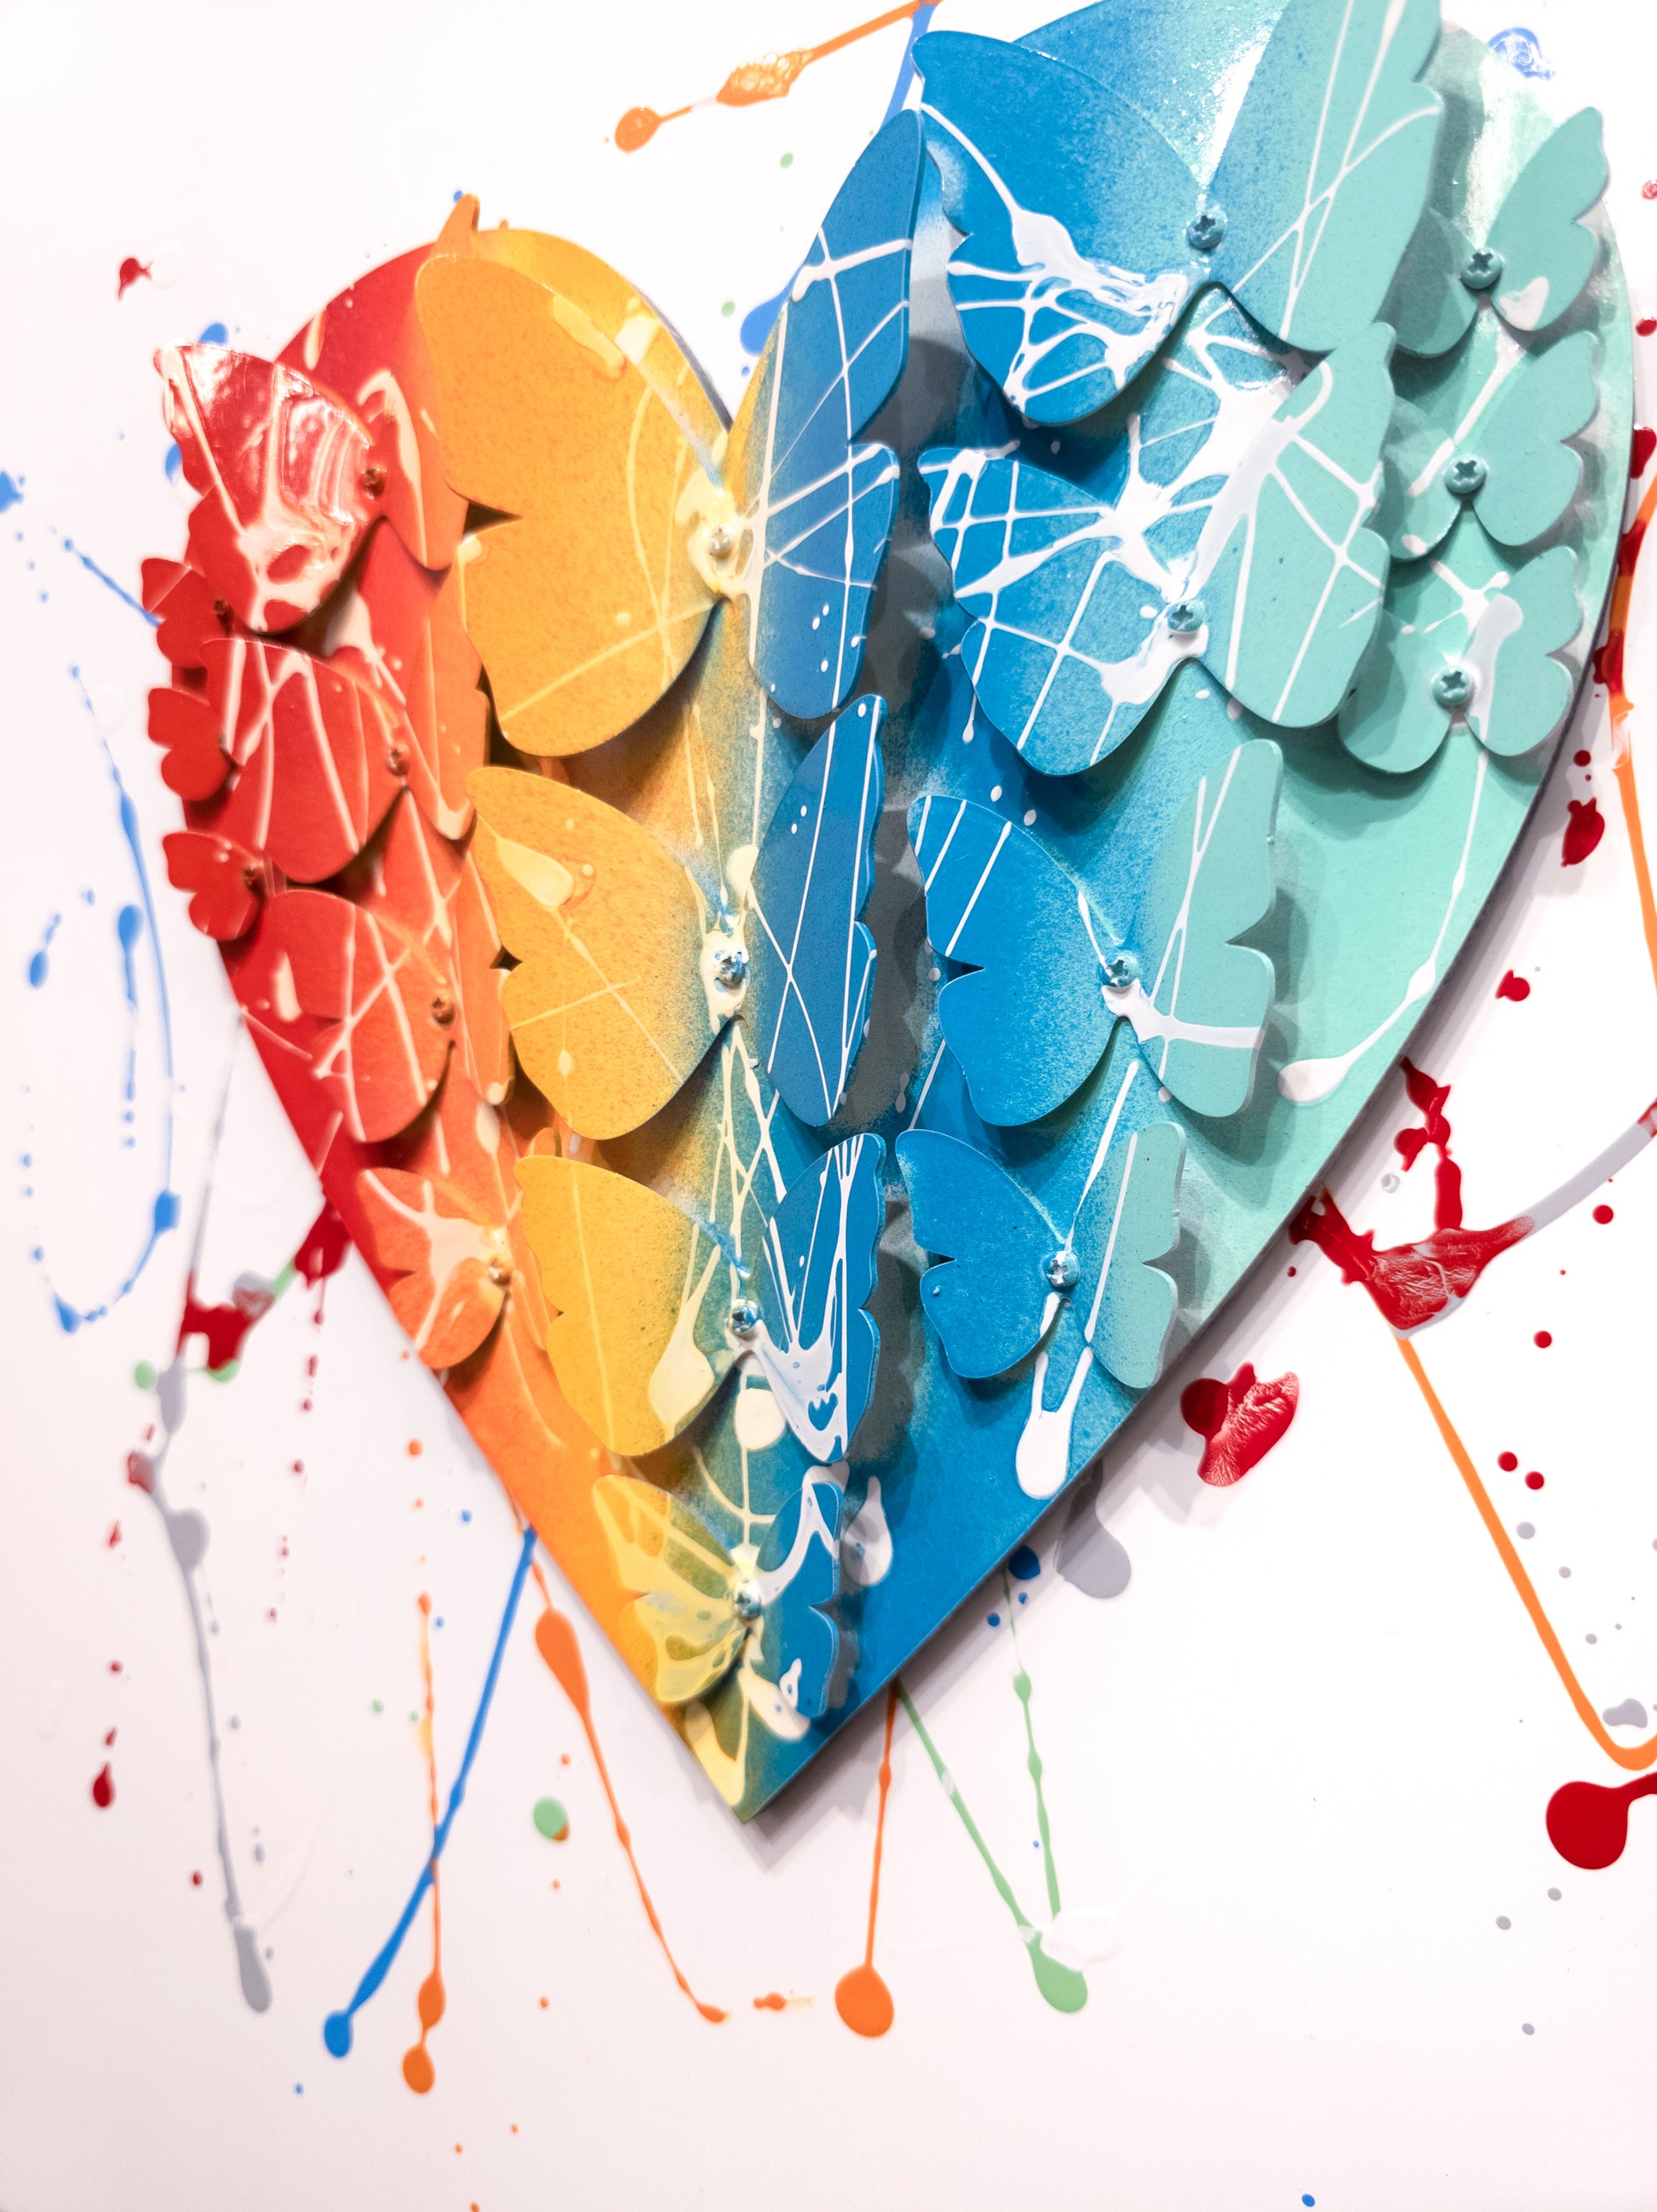 Right side view of colorful Heart artwork	